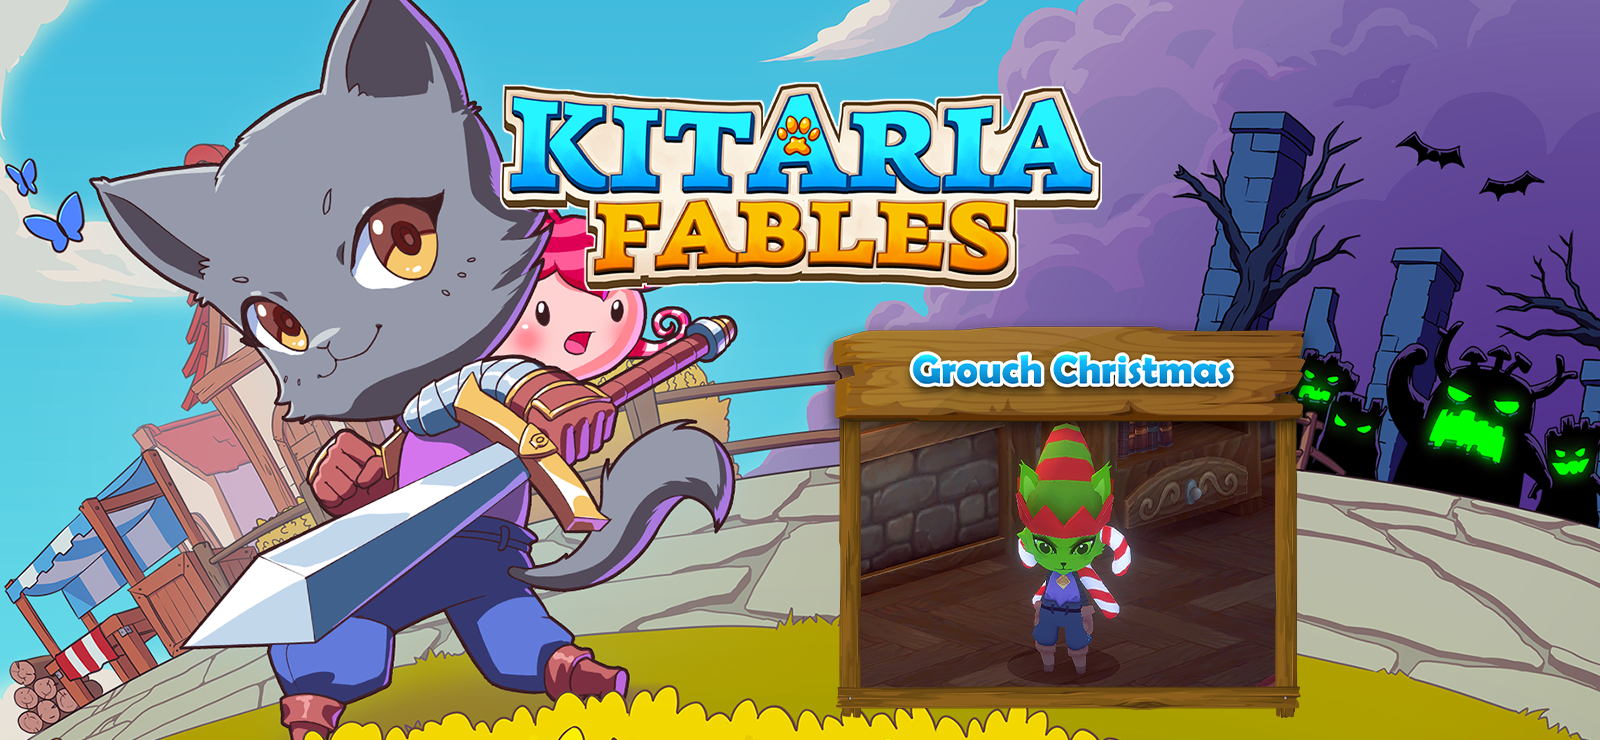 Kitaria Fables - Grouch Christmas Outfit